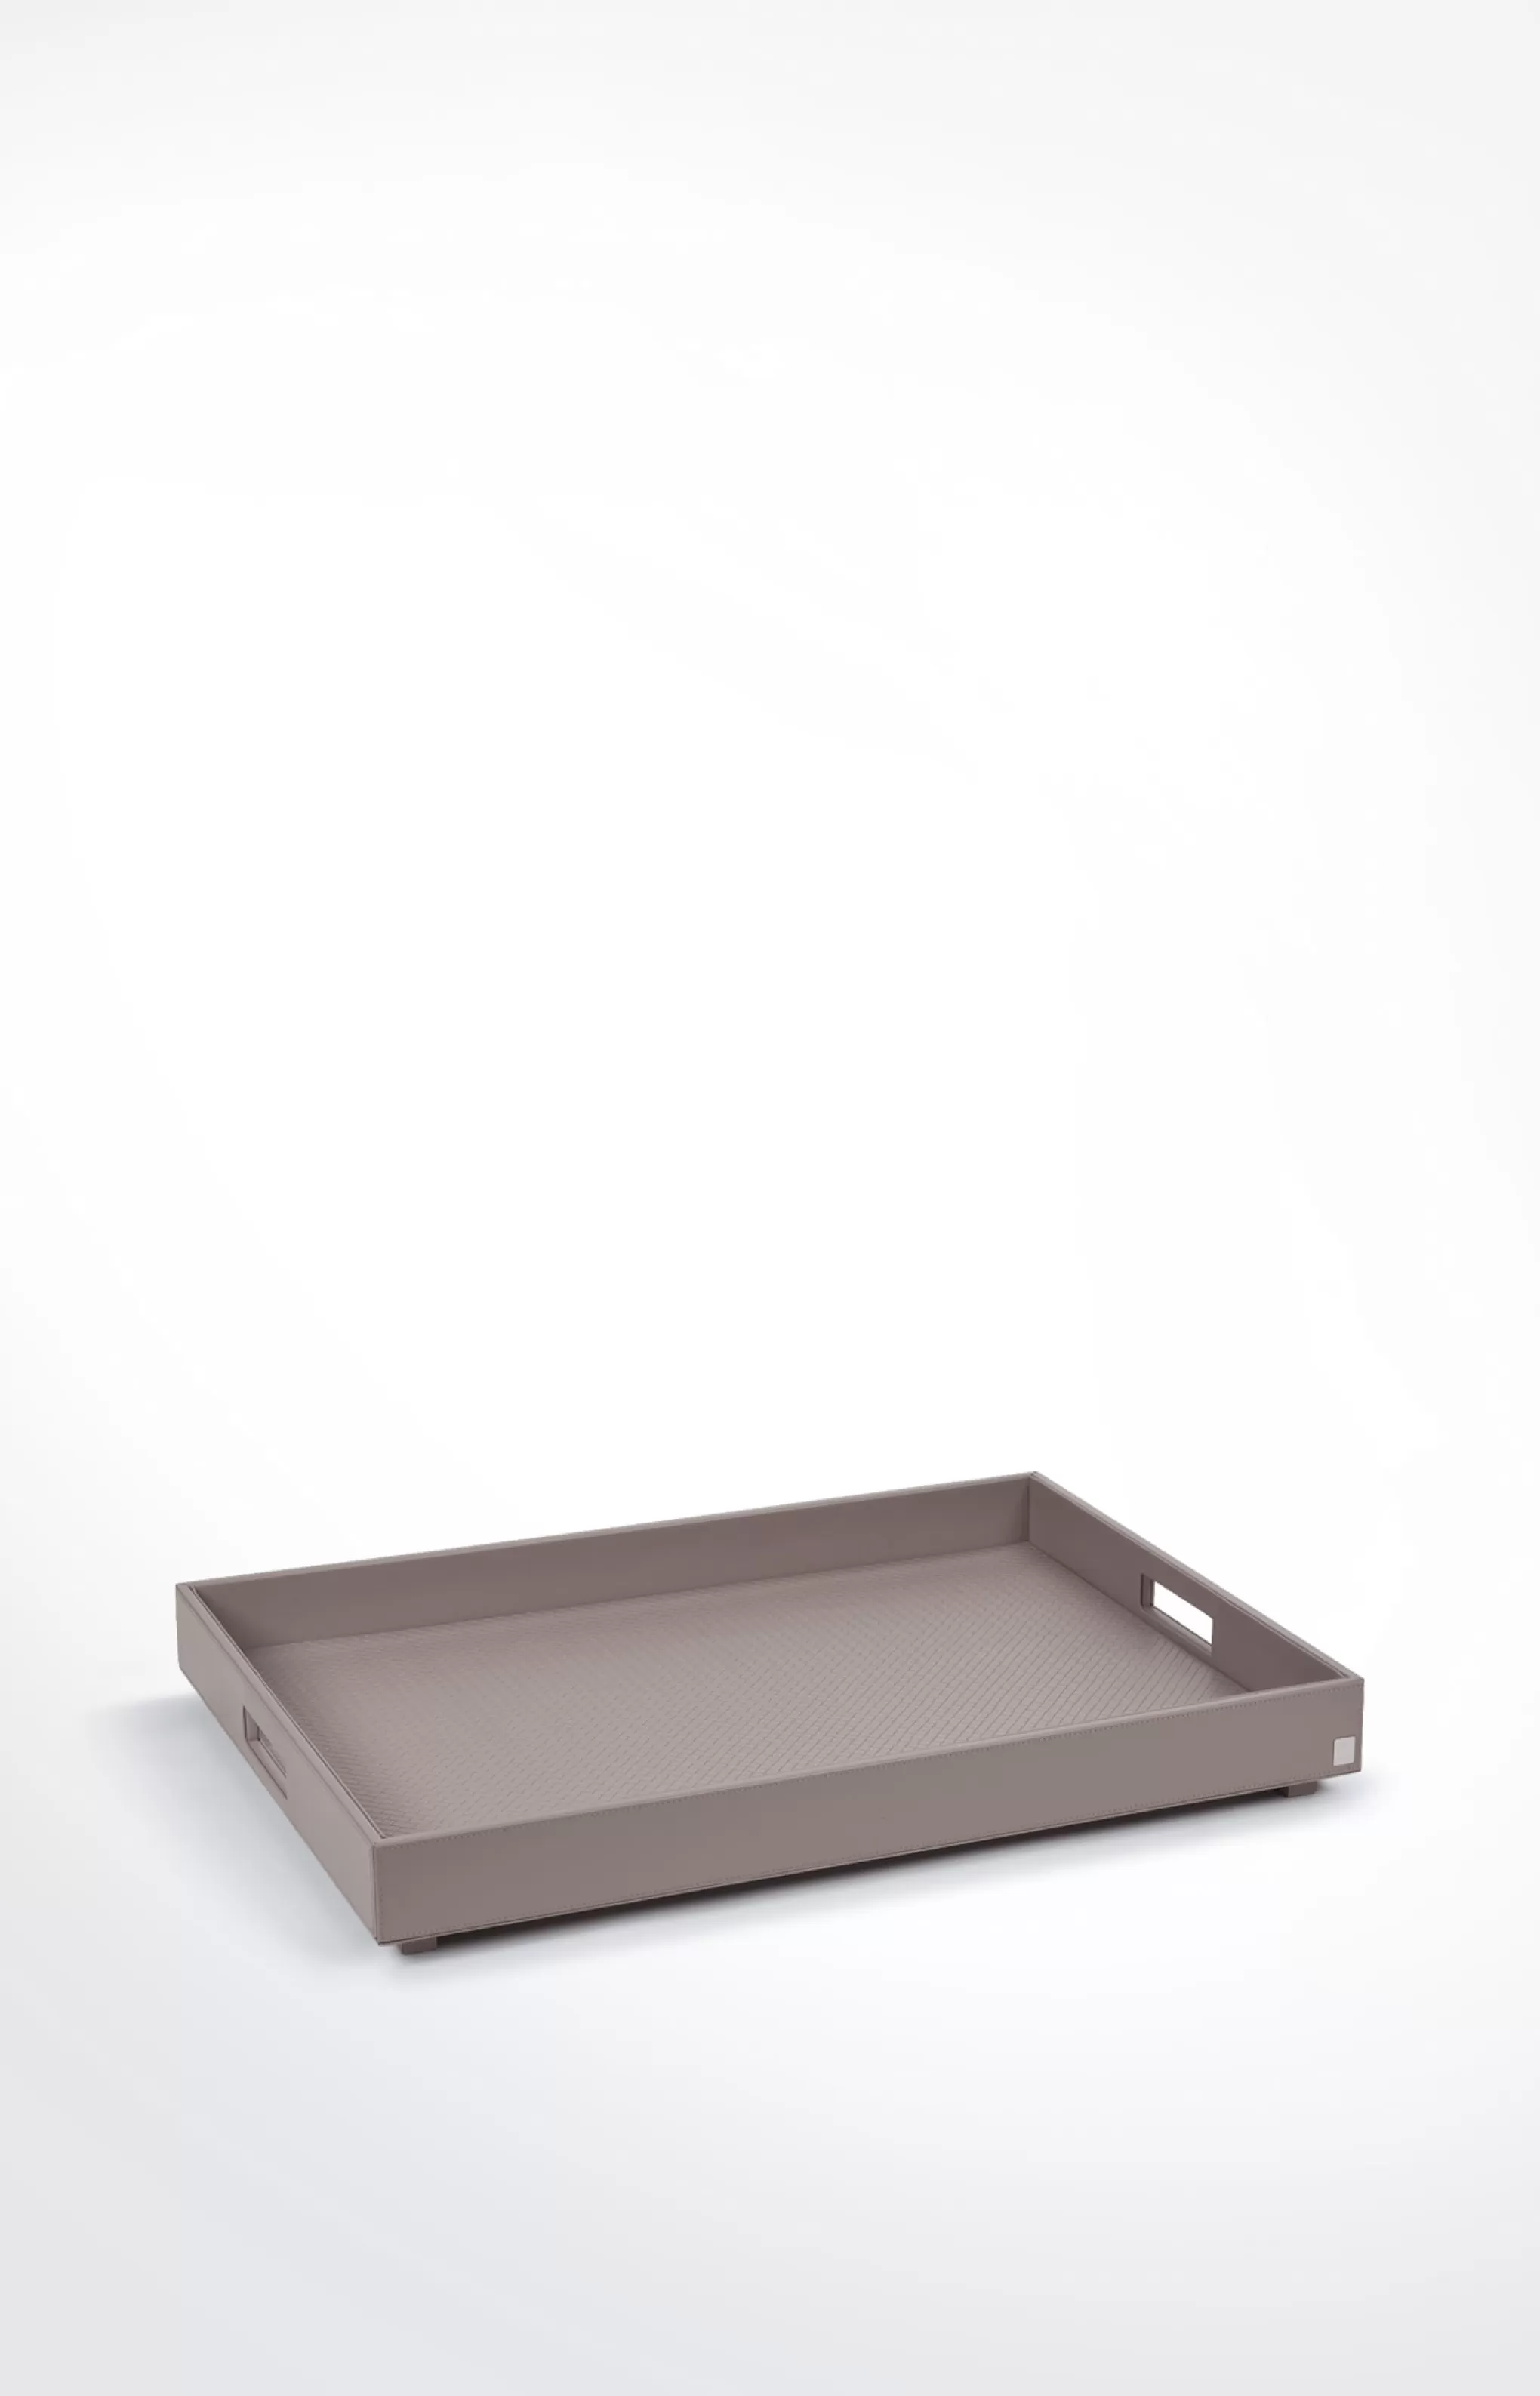 Bathroom Accessories | Discover Everything | Home Accessories | Table Accessories*JOOP Bathroom Accessories | Discover Everything | Home Accessories | Table Accessories Large homeline tray, grey-pink